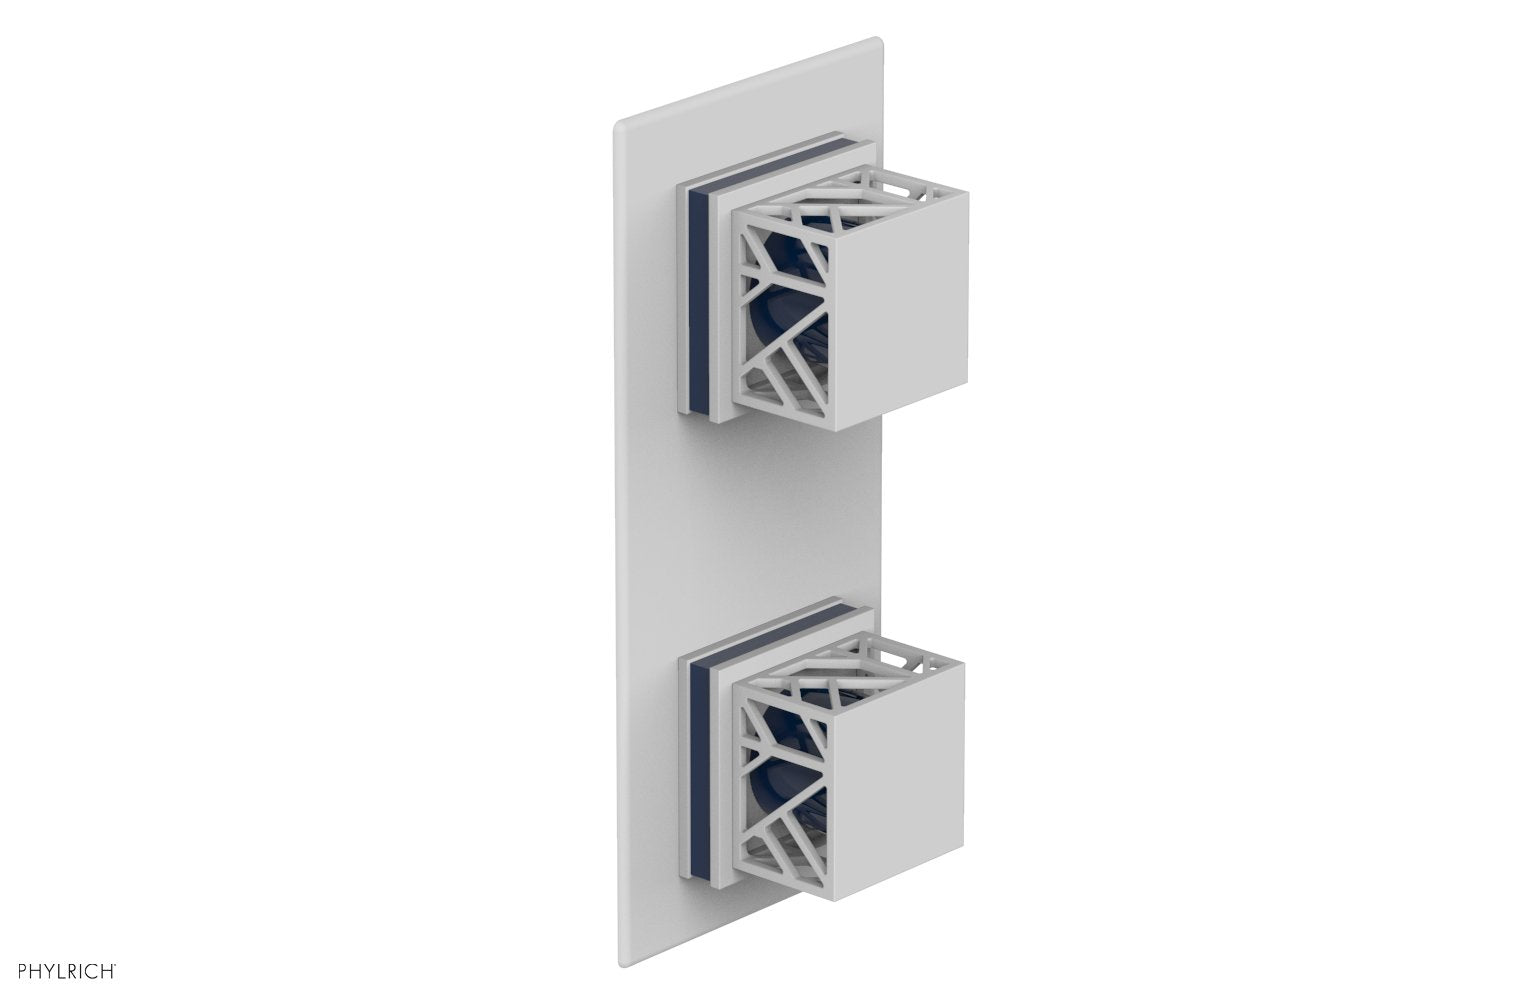 Phylrich JOLIE Thermostatic Valve with Volume Control or Diverter with "Navy Blue" Accents